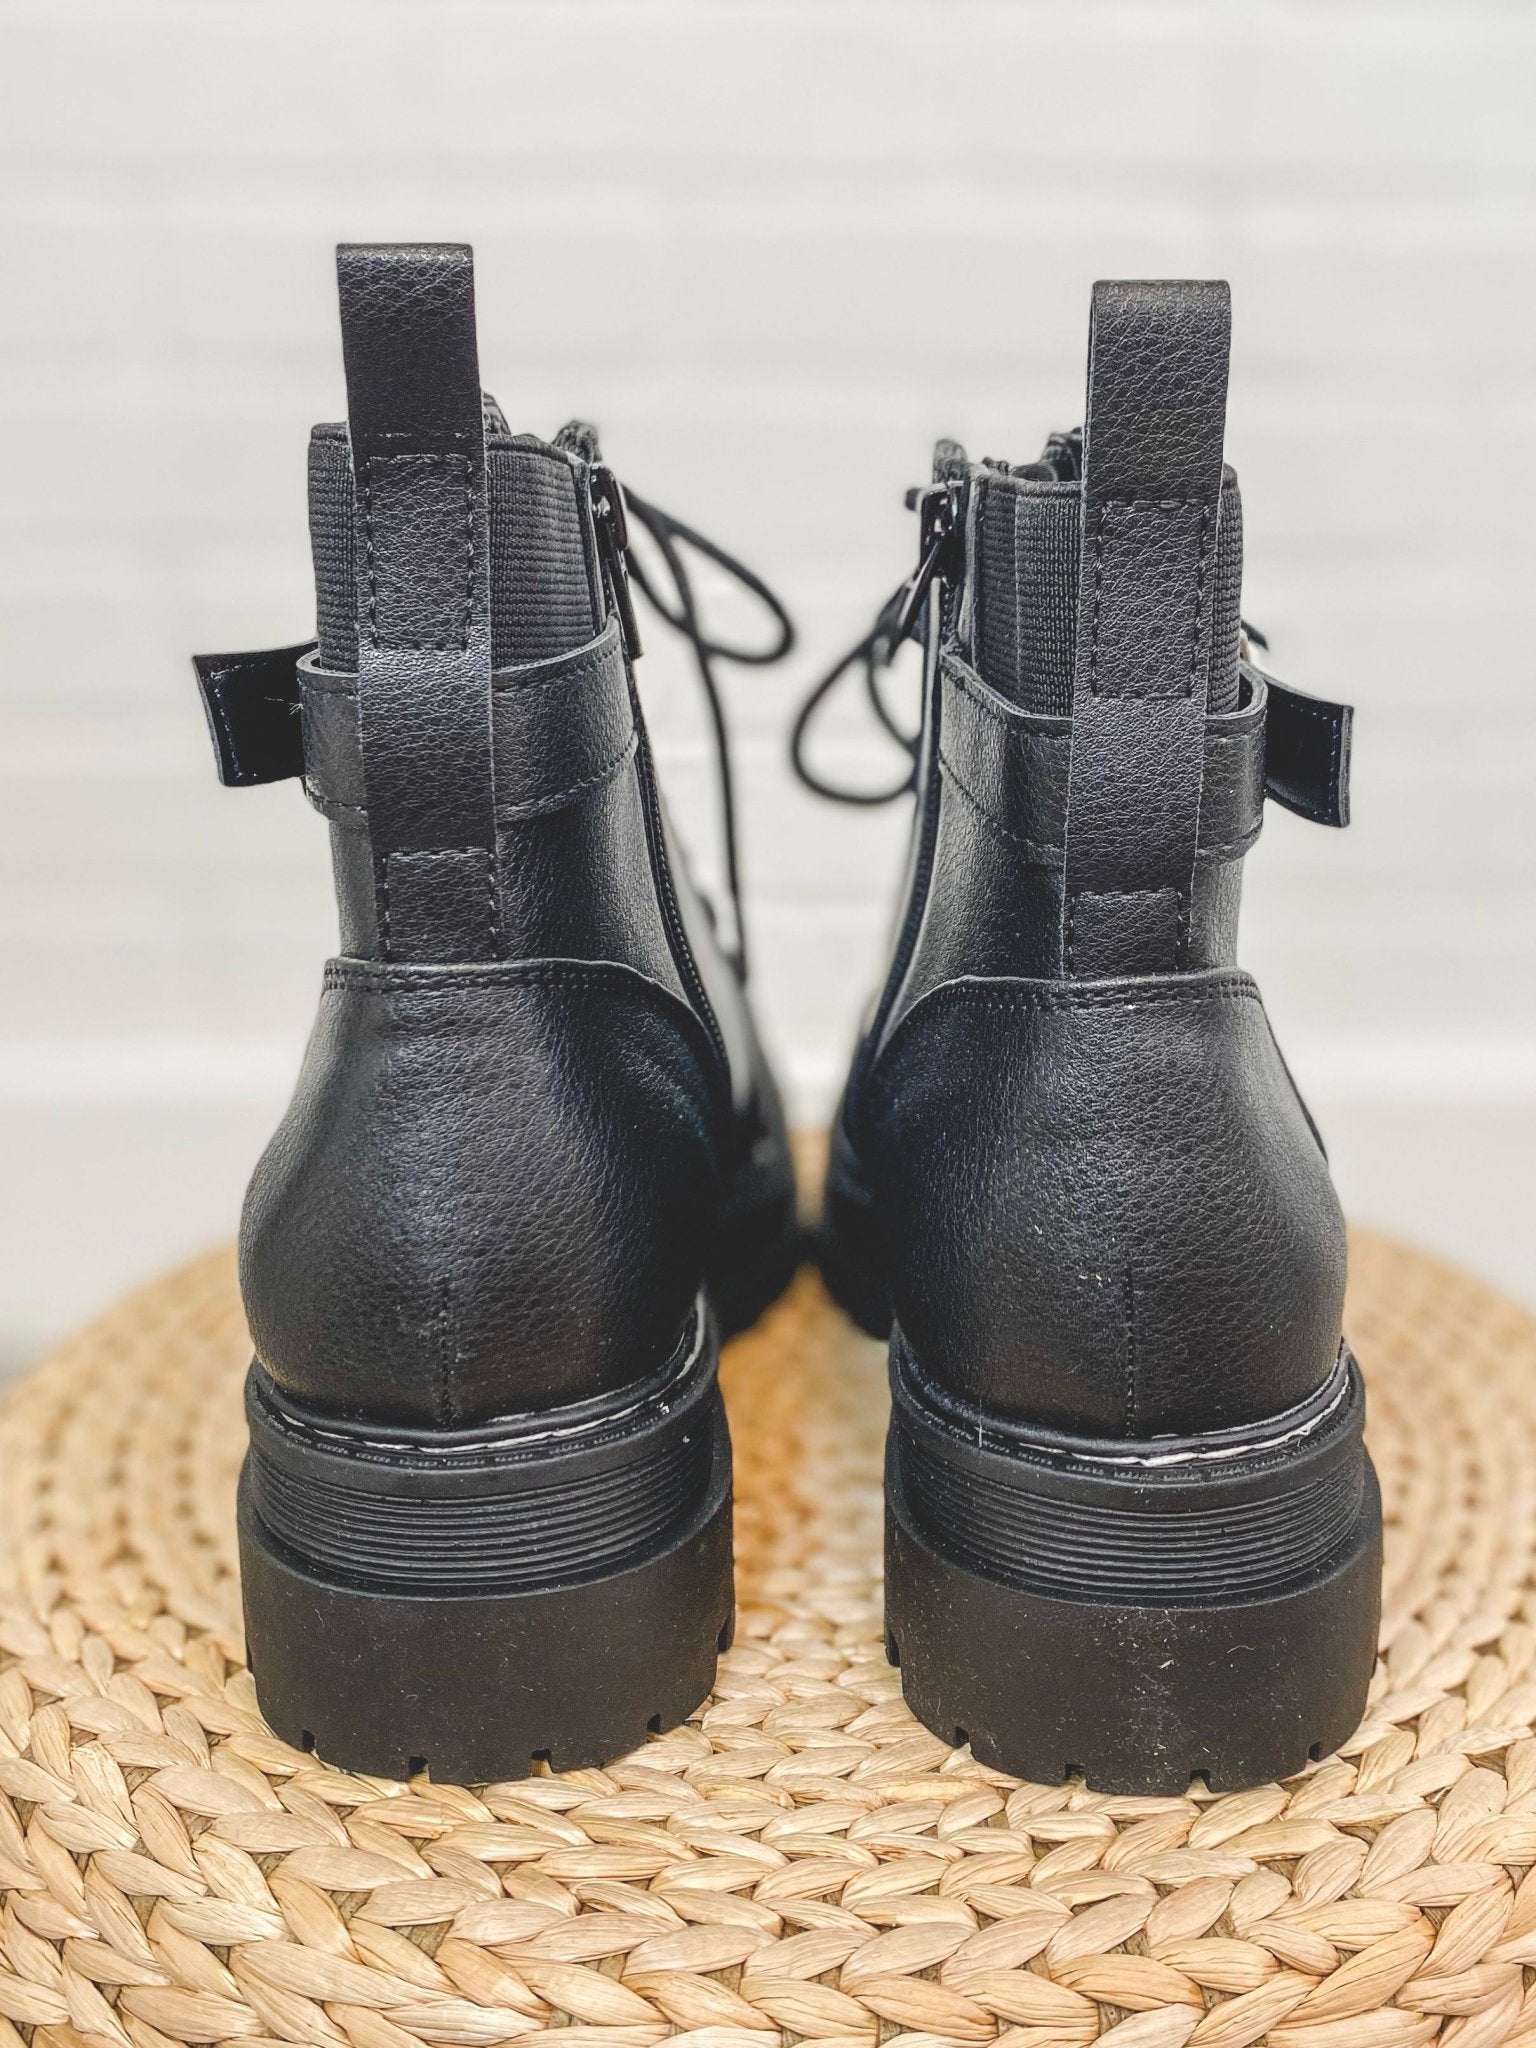 Lace up combat boots black - Affordable Shoes - Boutique Shoes at Lush Fashion Lounge Boutique in Oklahoma City